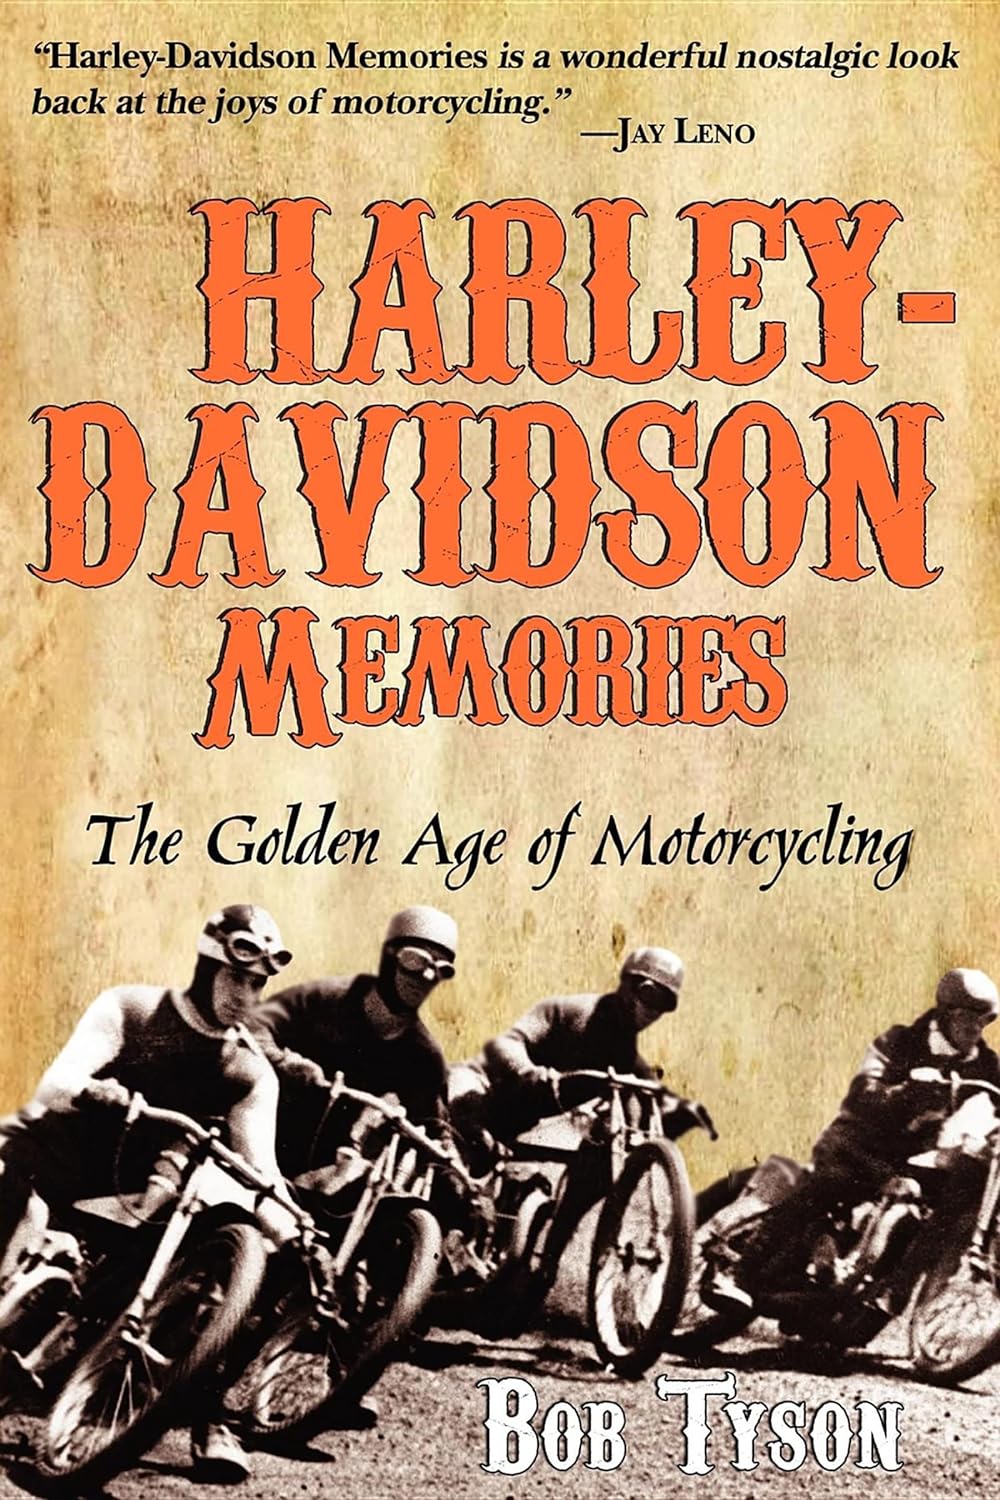 Harley-Davidson Memories: The Golden Age of Motorcycling